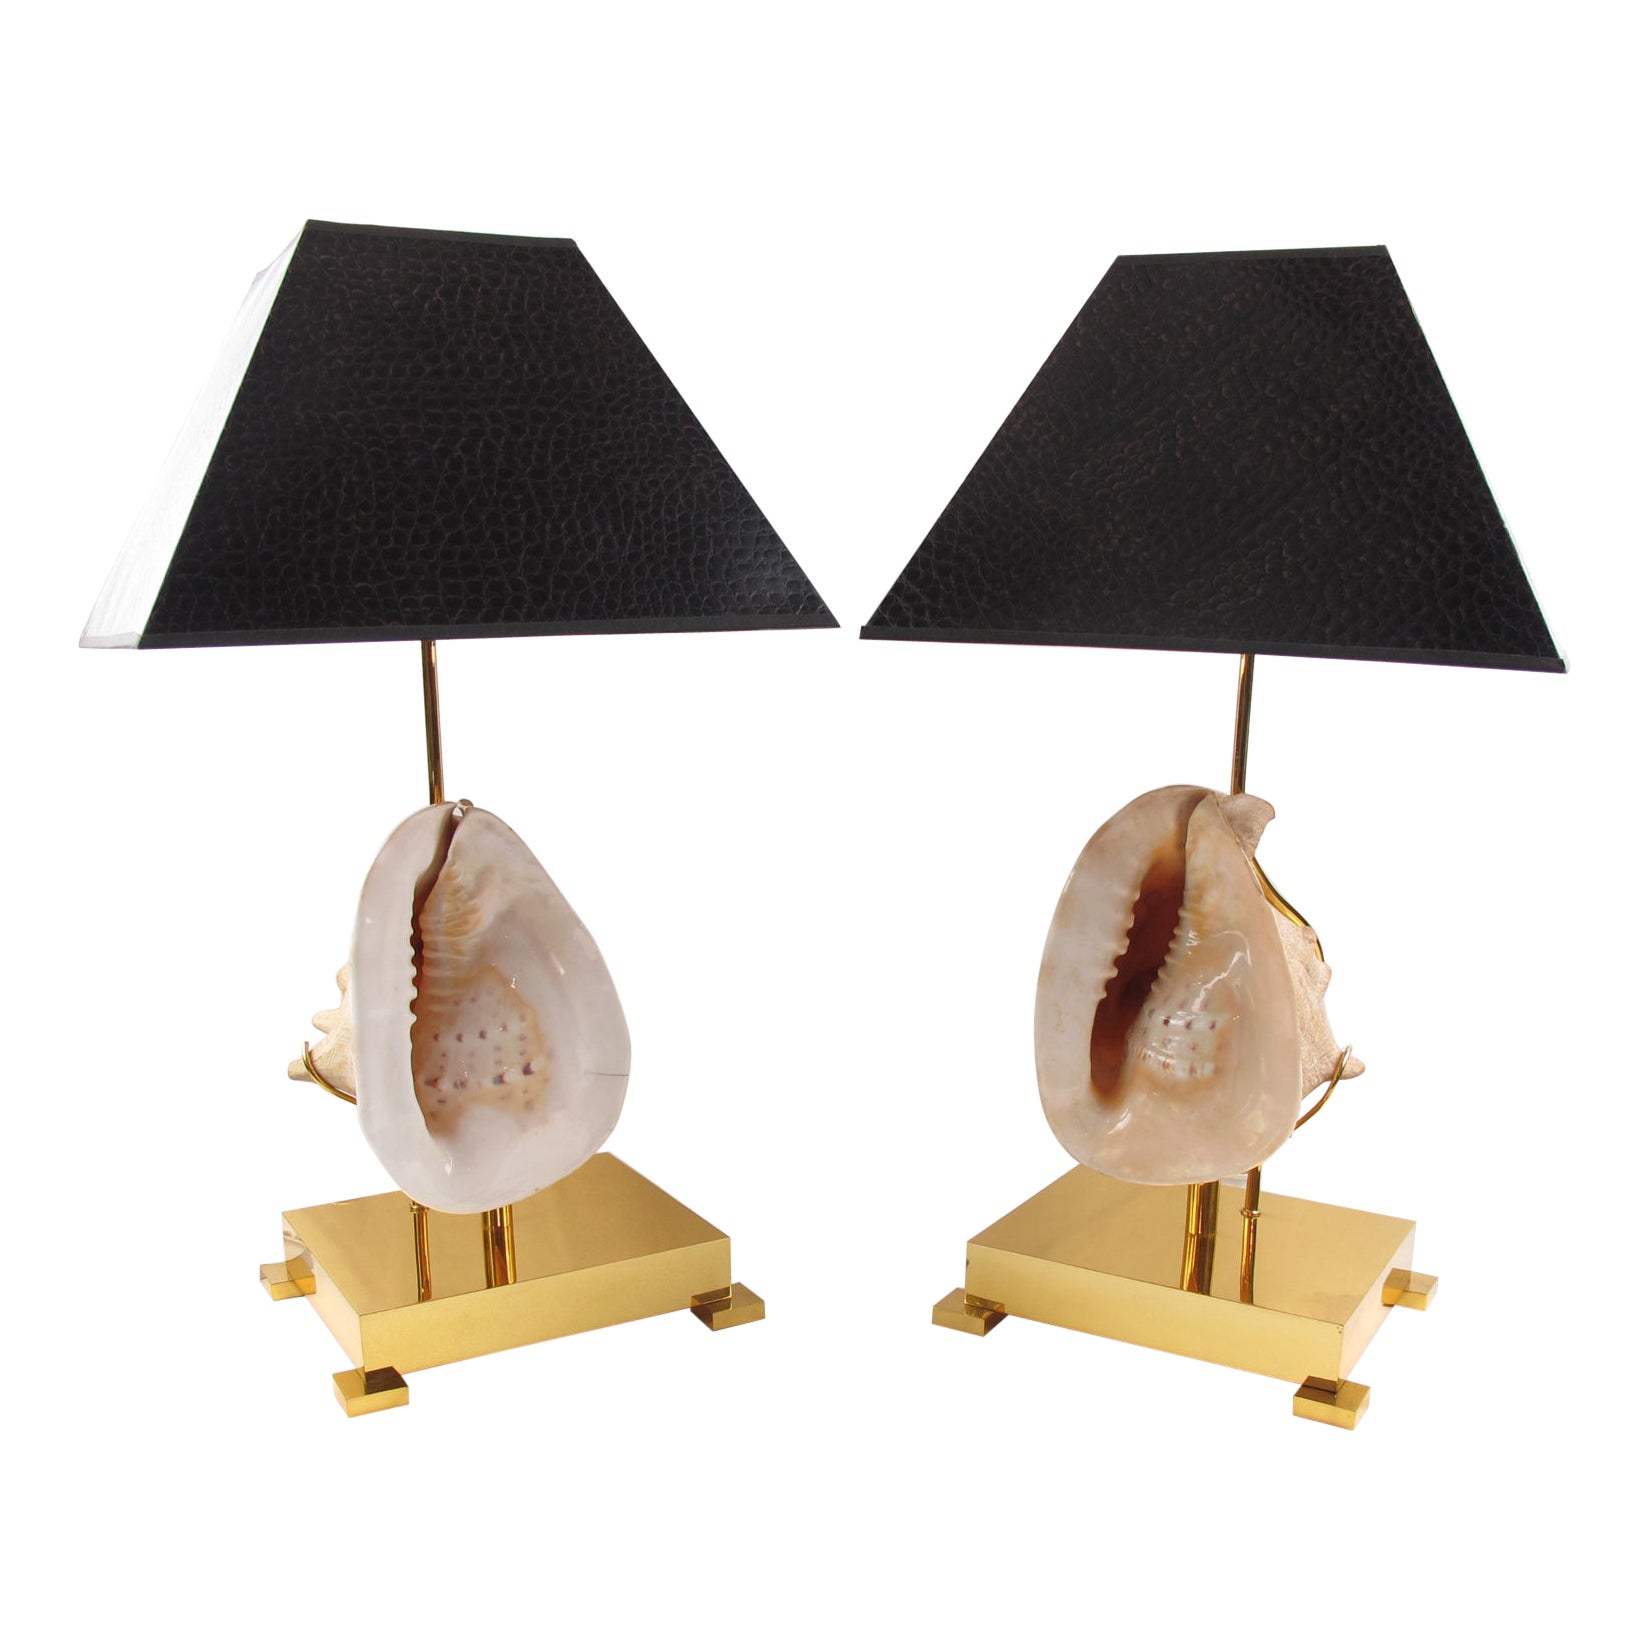 Willy Daro Brass Table Lamps with Mounted Seashell, a pair